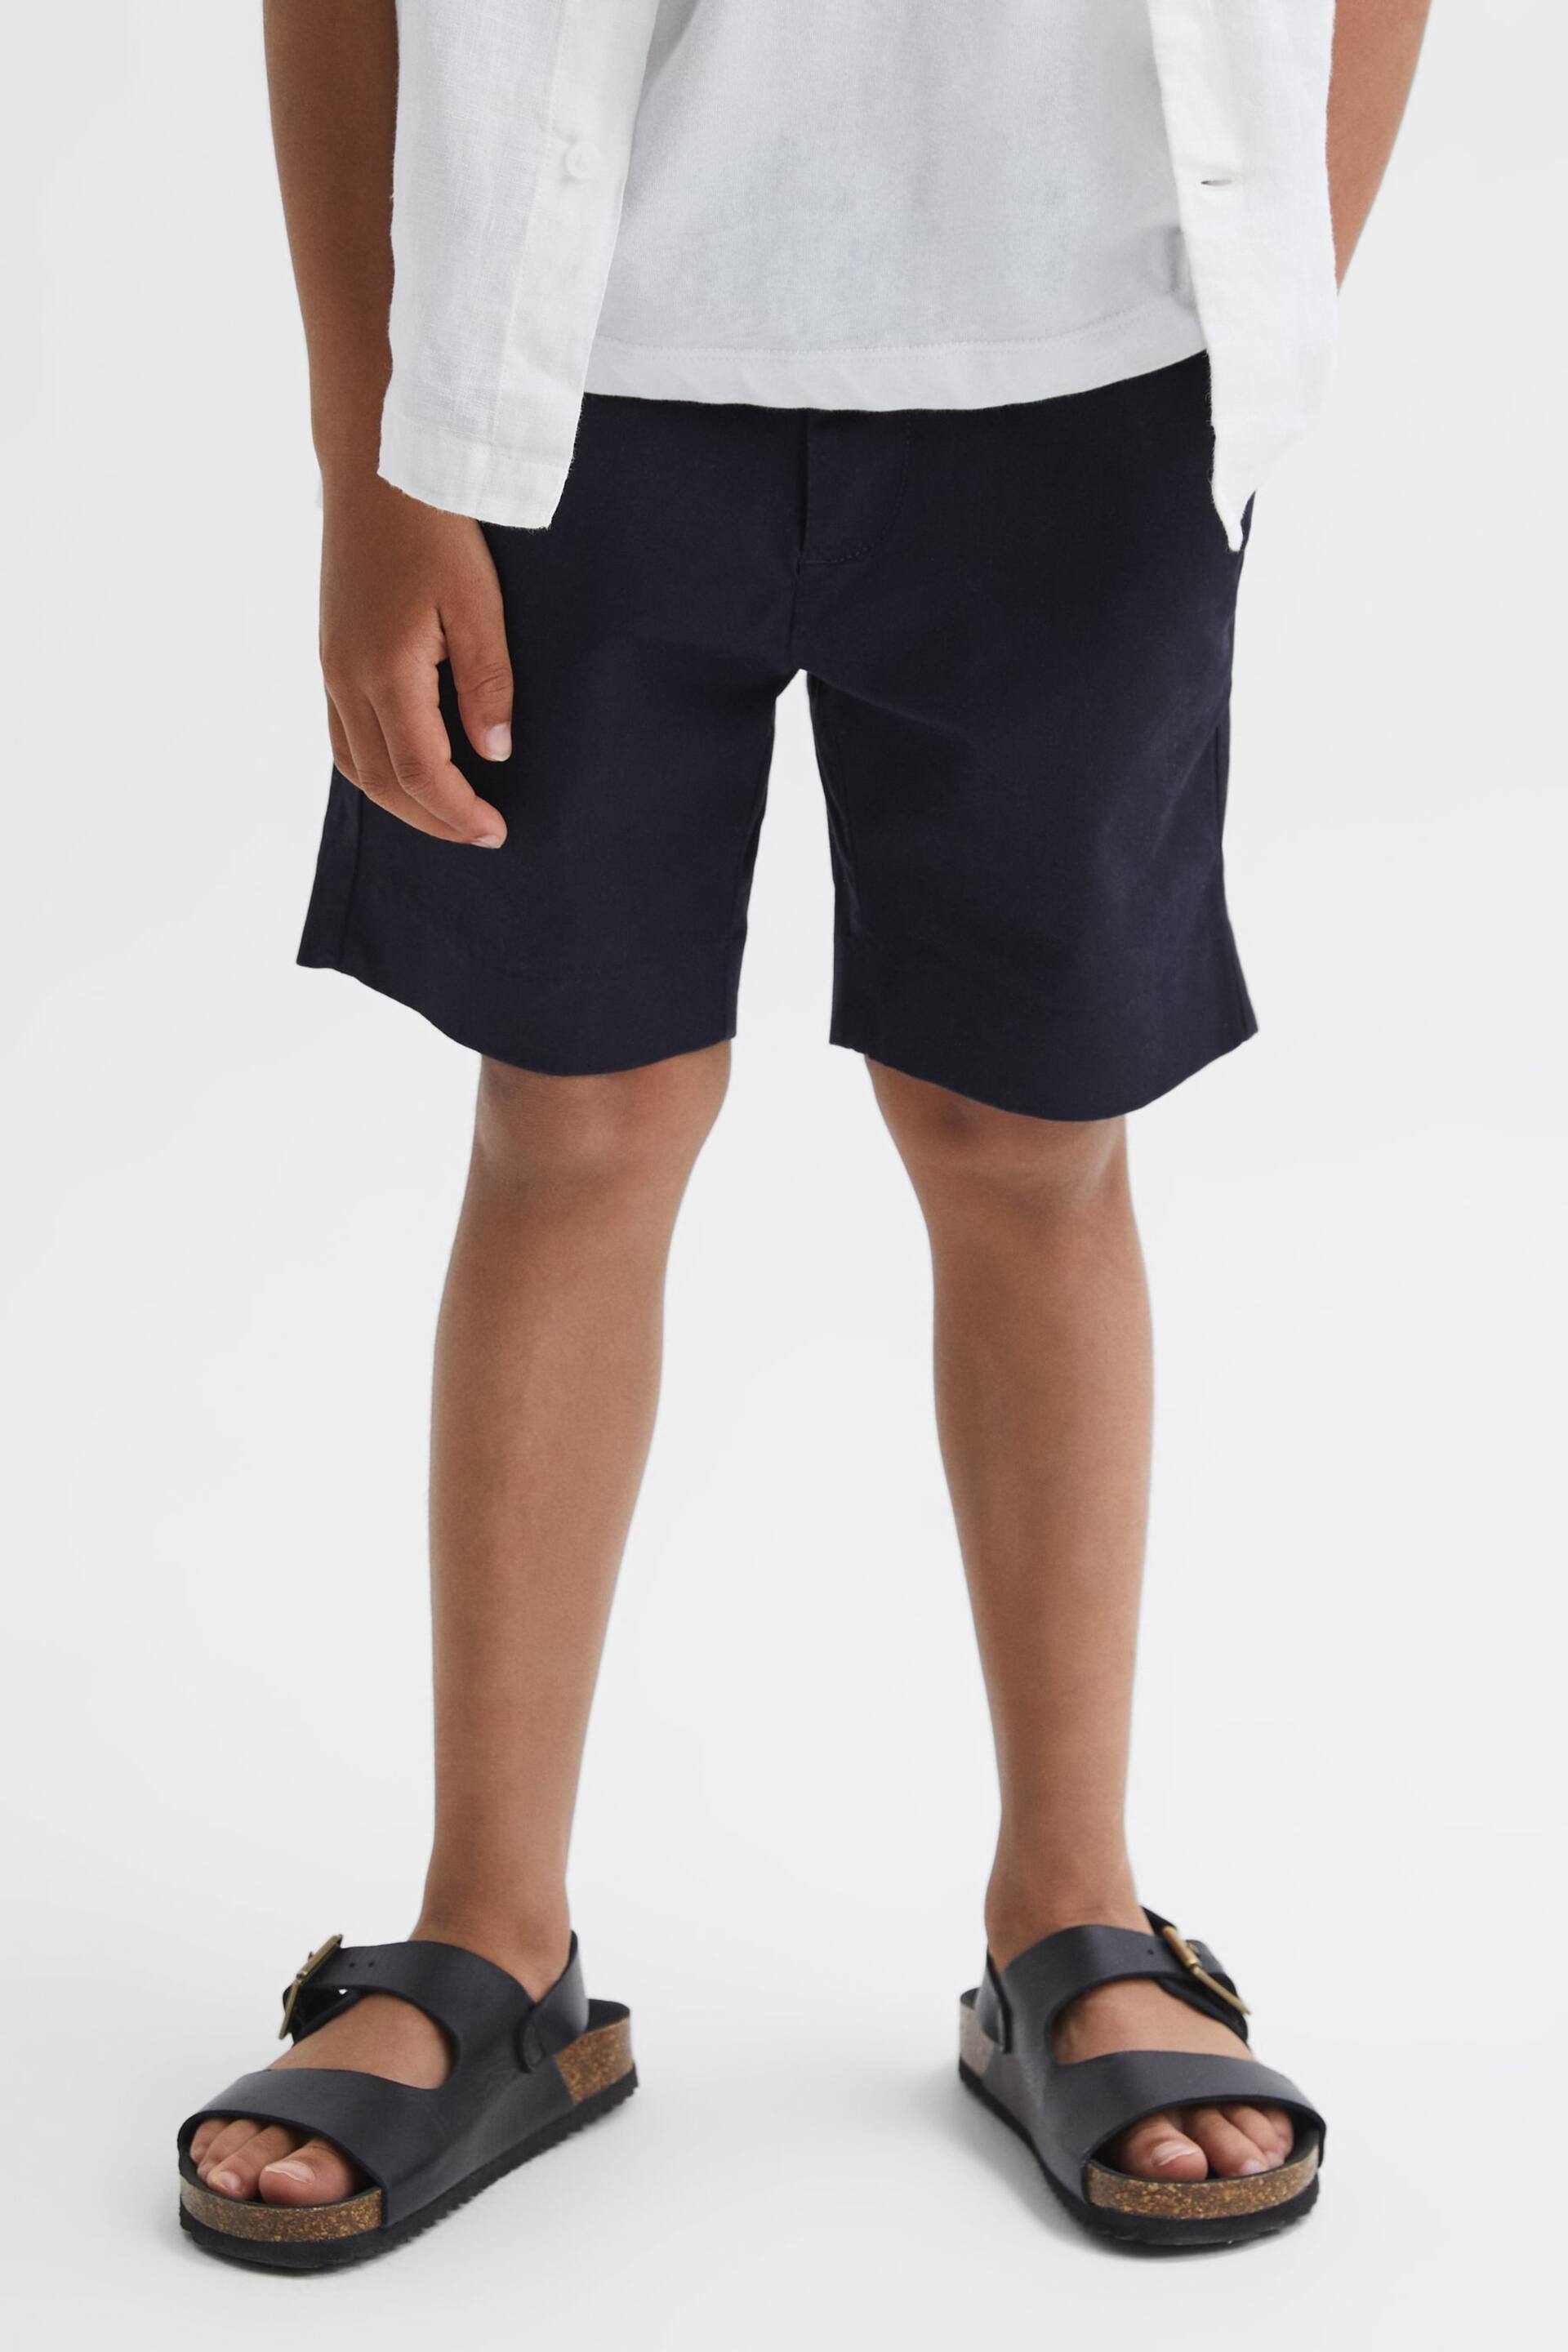 Reiss Navy Wicket Senior Casual Chino Shorts - Image 1 of 5